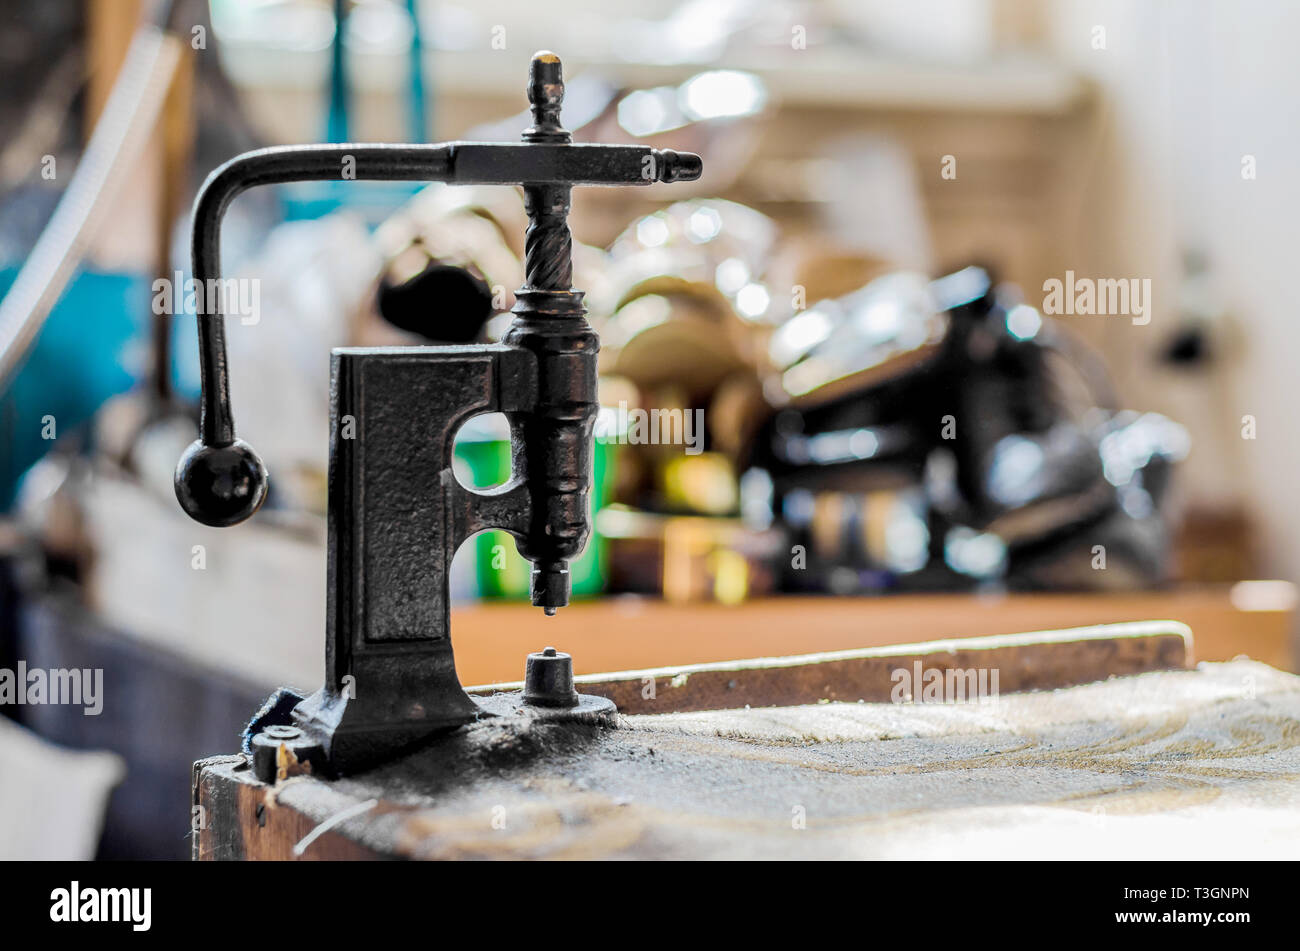 Vintage hand-press for setting rivets on clothes. The shoemaker's workshop. Stock Photo